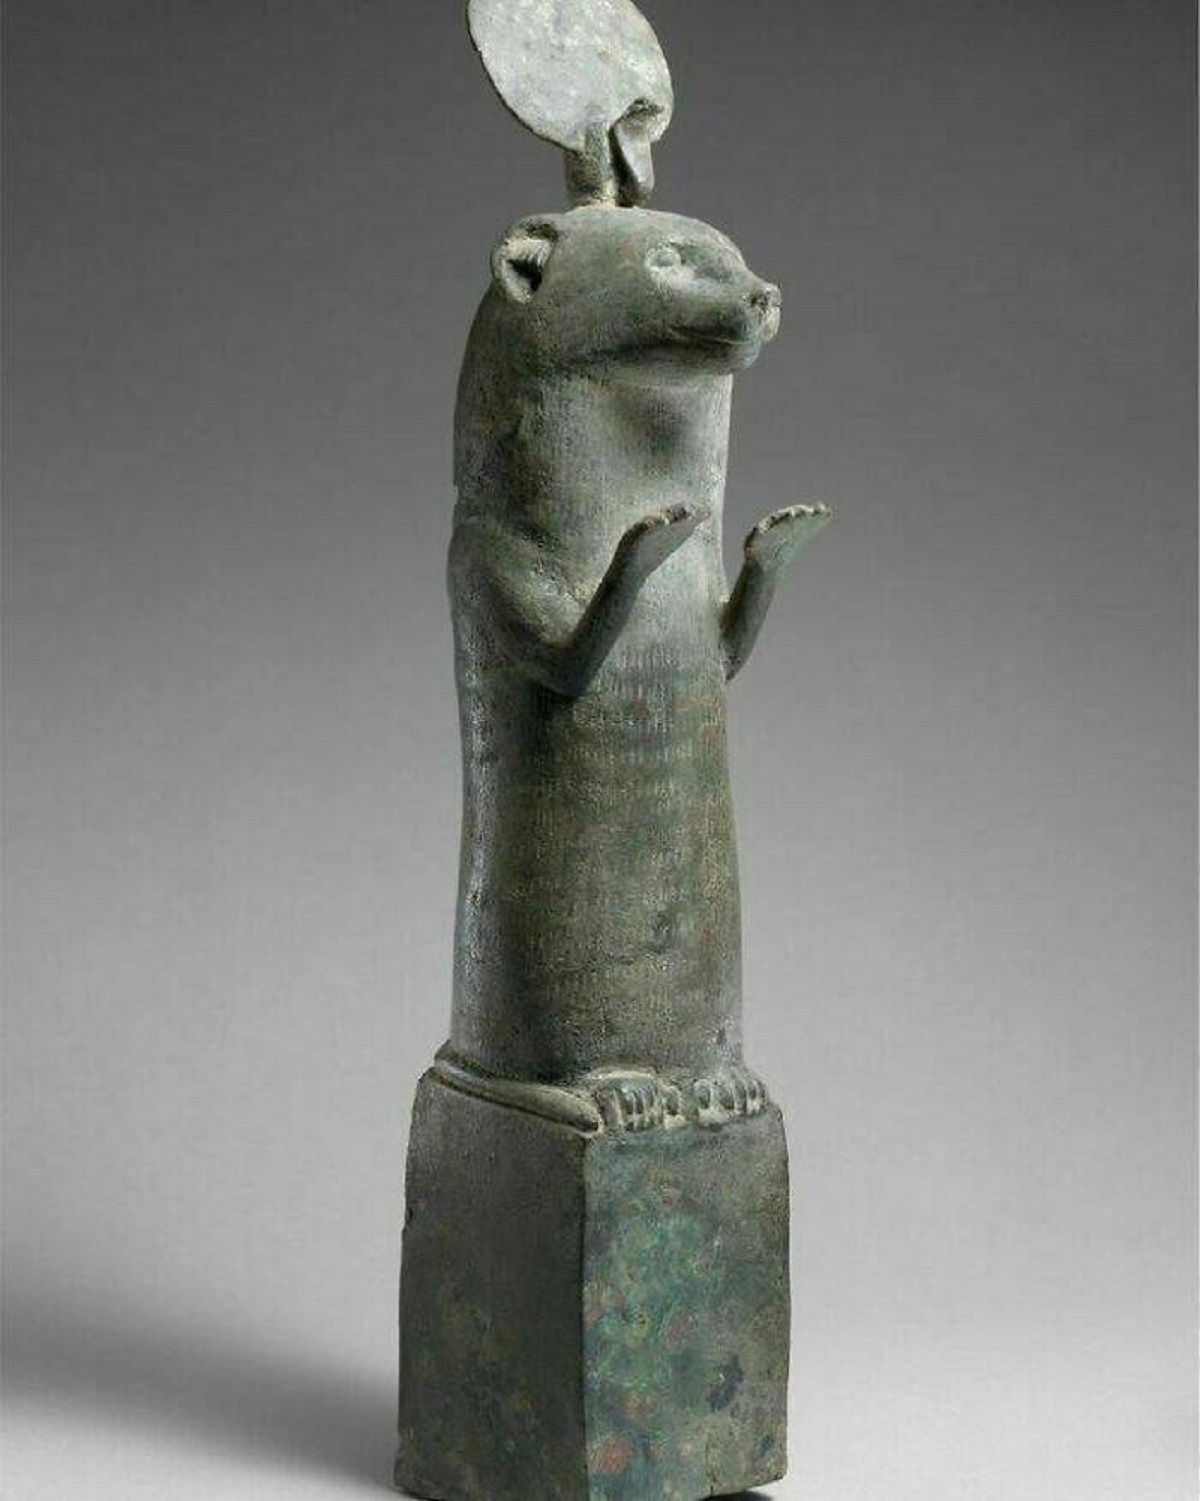 "An Adorable Ancient Egyptian Otter Statue!"